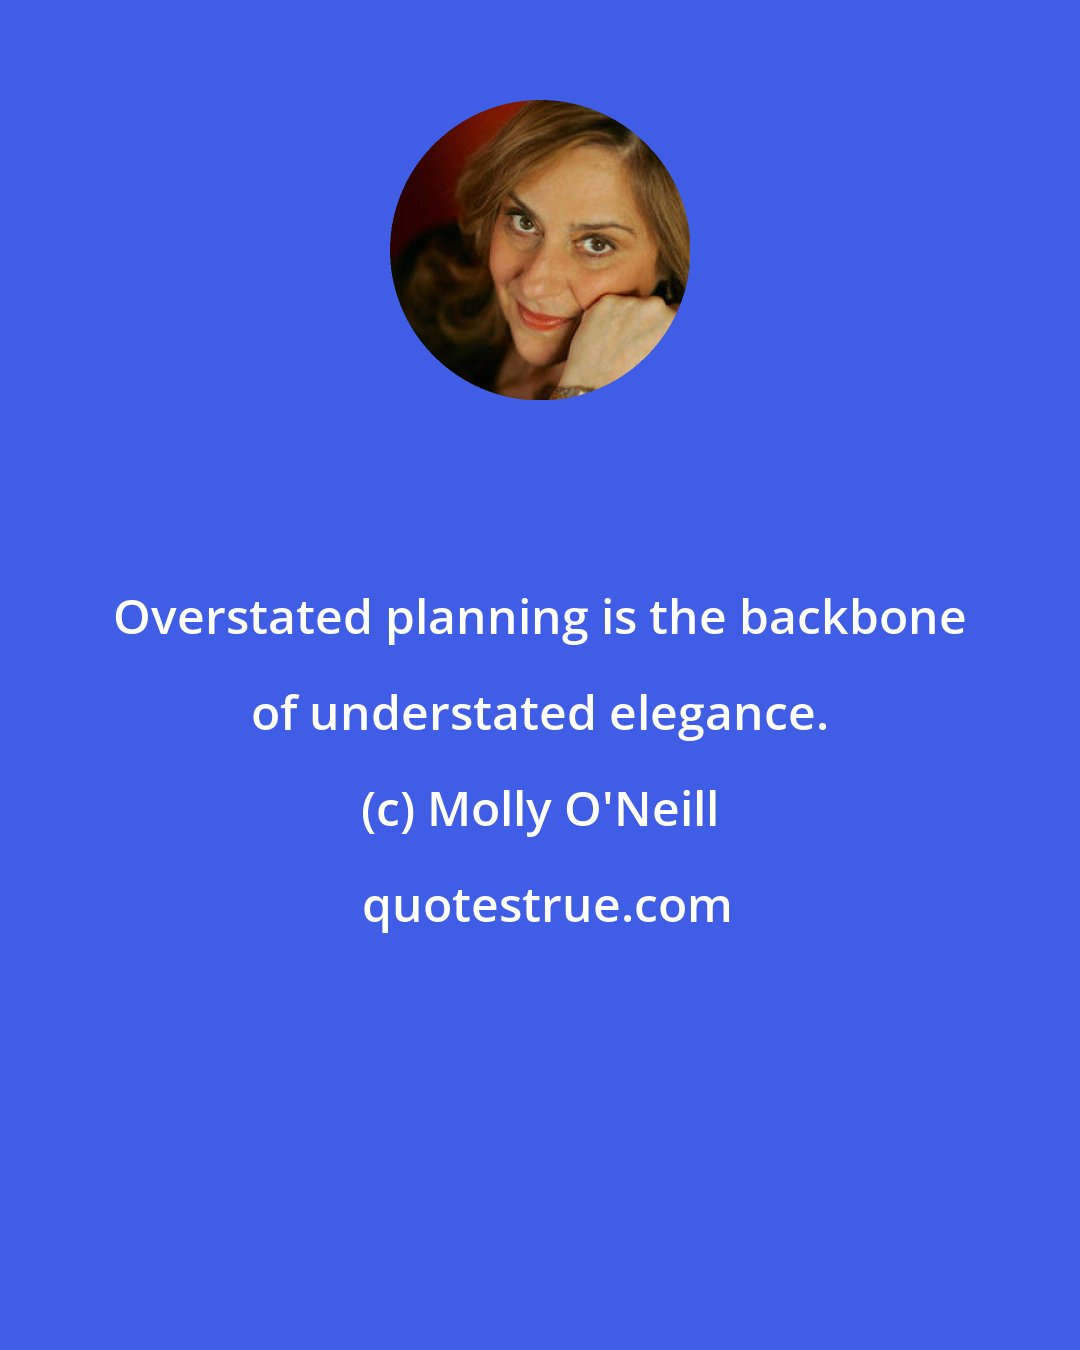 Molly O'Neill: Overstated planning is the backbone of understated elegance.